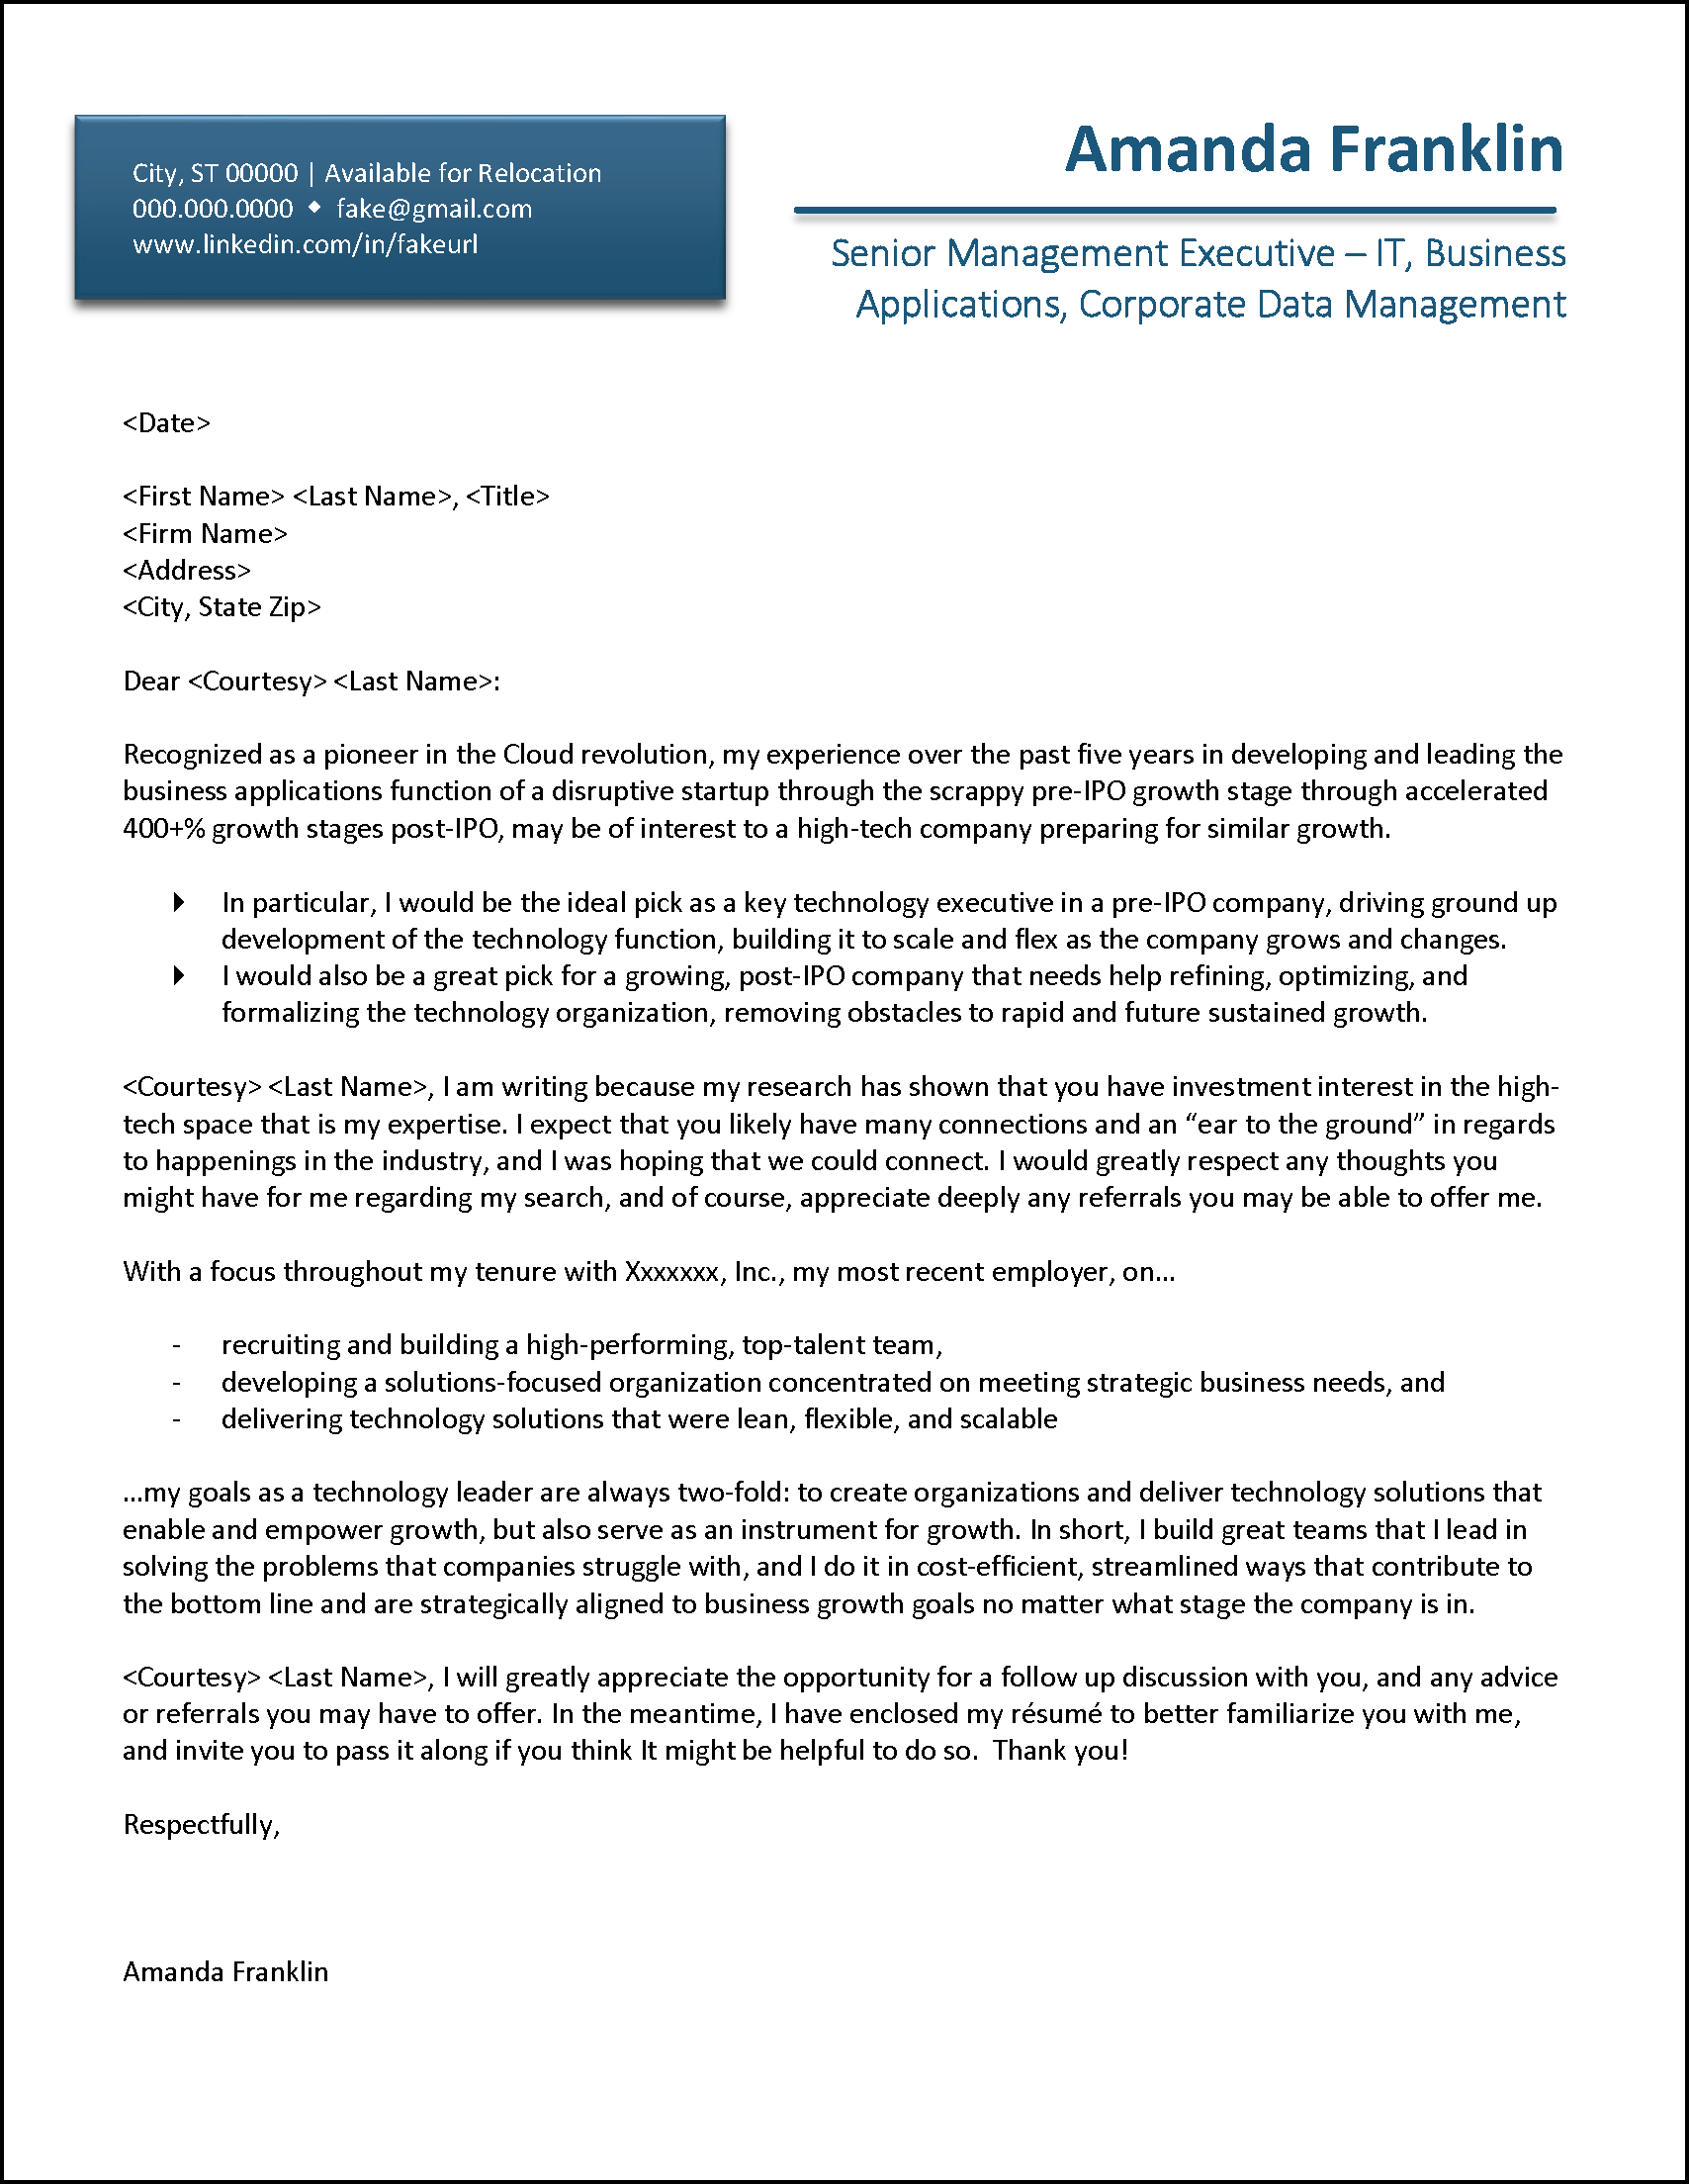 Example Letter to Reach Out to Venture Capital Firms During Your Job Search